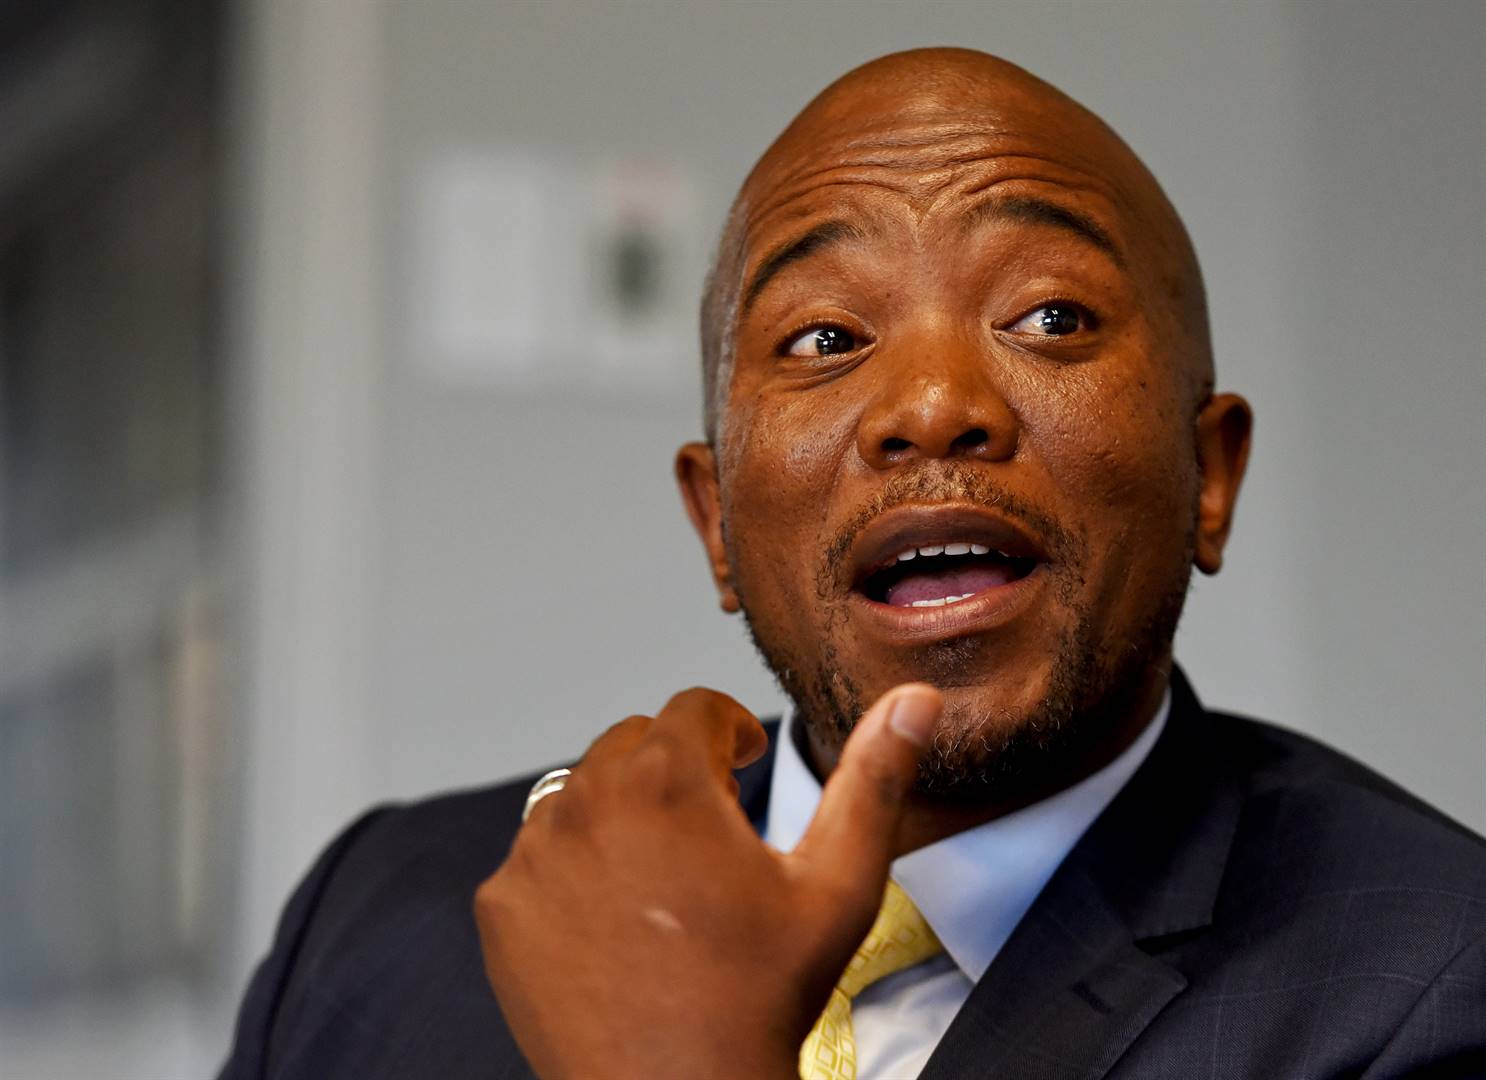 Build One SA (Bosa) leader Mmusi Maimane announced that seven parties will form an alliance for the upcoming 29 May national elections.